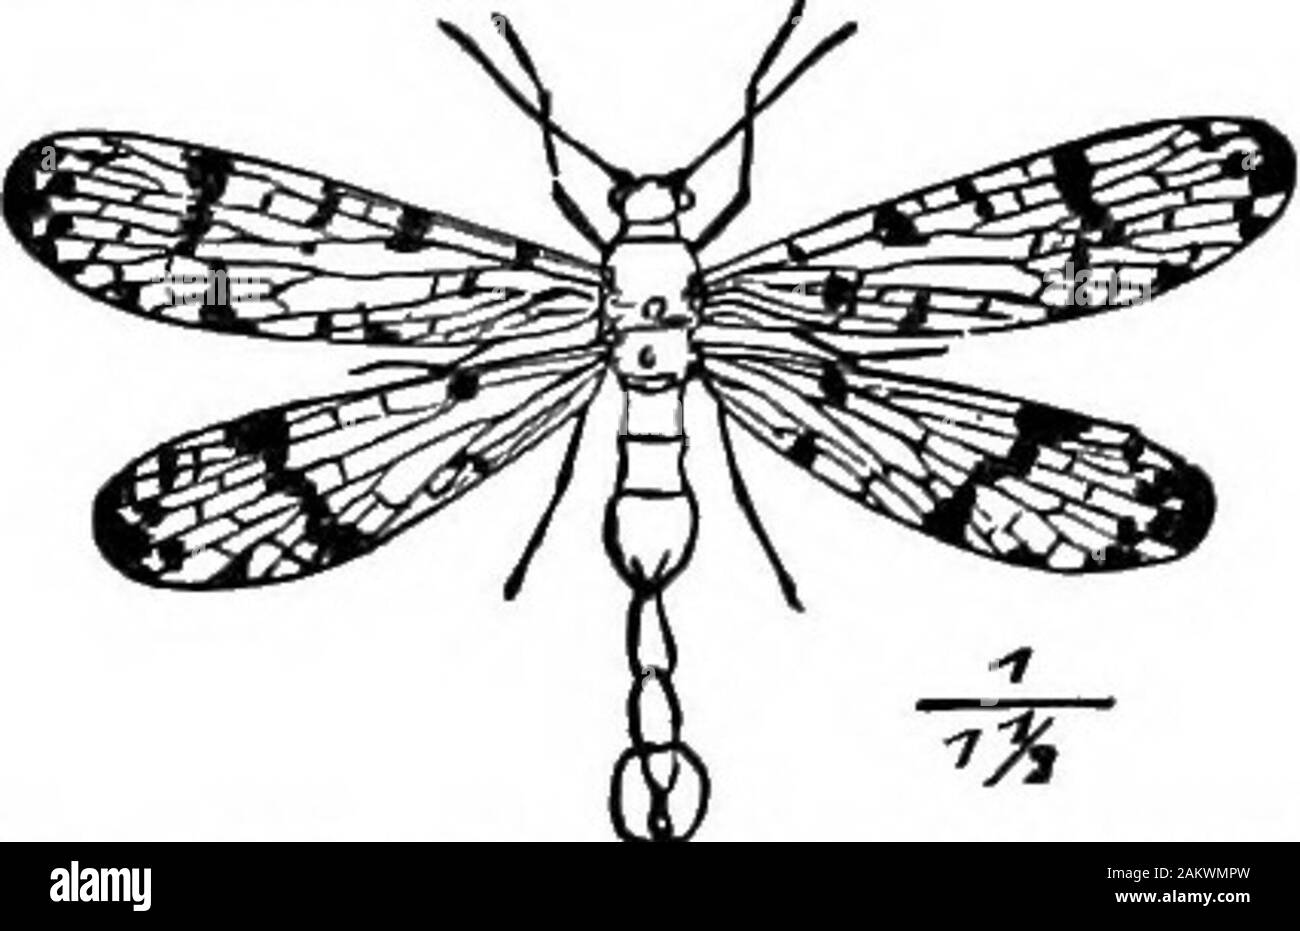 First lesson in zoology : adapted for use in schools . oil stalks. (Natural size.) Ex-. Fig. 1116.—Panorpa or ScorpionFly. CHAPTER XVI. THE NET-VEINED INSECTS WITH A COMPLETE META.MORPHOSIS.* We now come to insects with a complete metamorphosis,the larva being more or less worm-like. The Lace-wi7iged Flies.—Insects ot the order Neuroptera(Greek, nerve-wings) havefree jaws adapted for bit-ing; the tongue (ligula) is entire, large, broad, and Fig. llla.-Chrysopa and its eggs placed rounded, while the pro-thorax is large and square,amples of the order are Oory-dalus, the lace-winged fly {Chry-sop Stock Photo